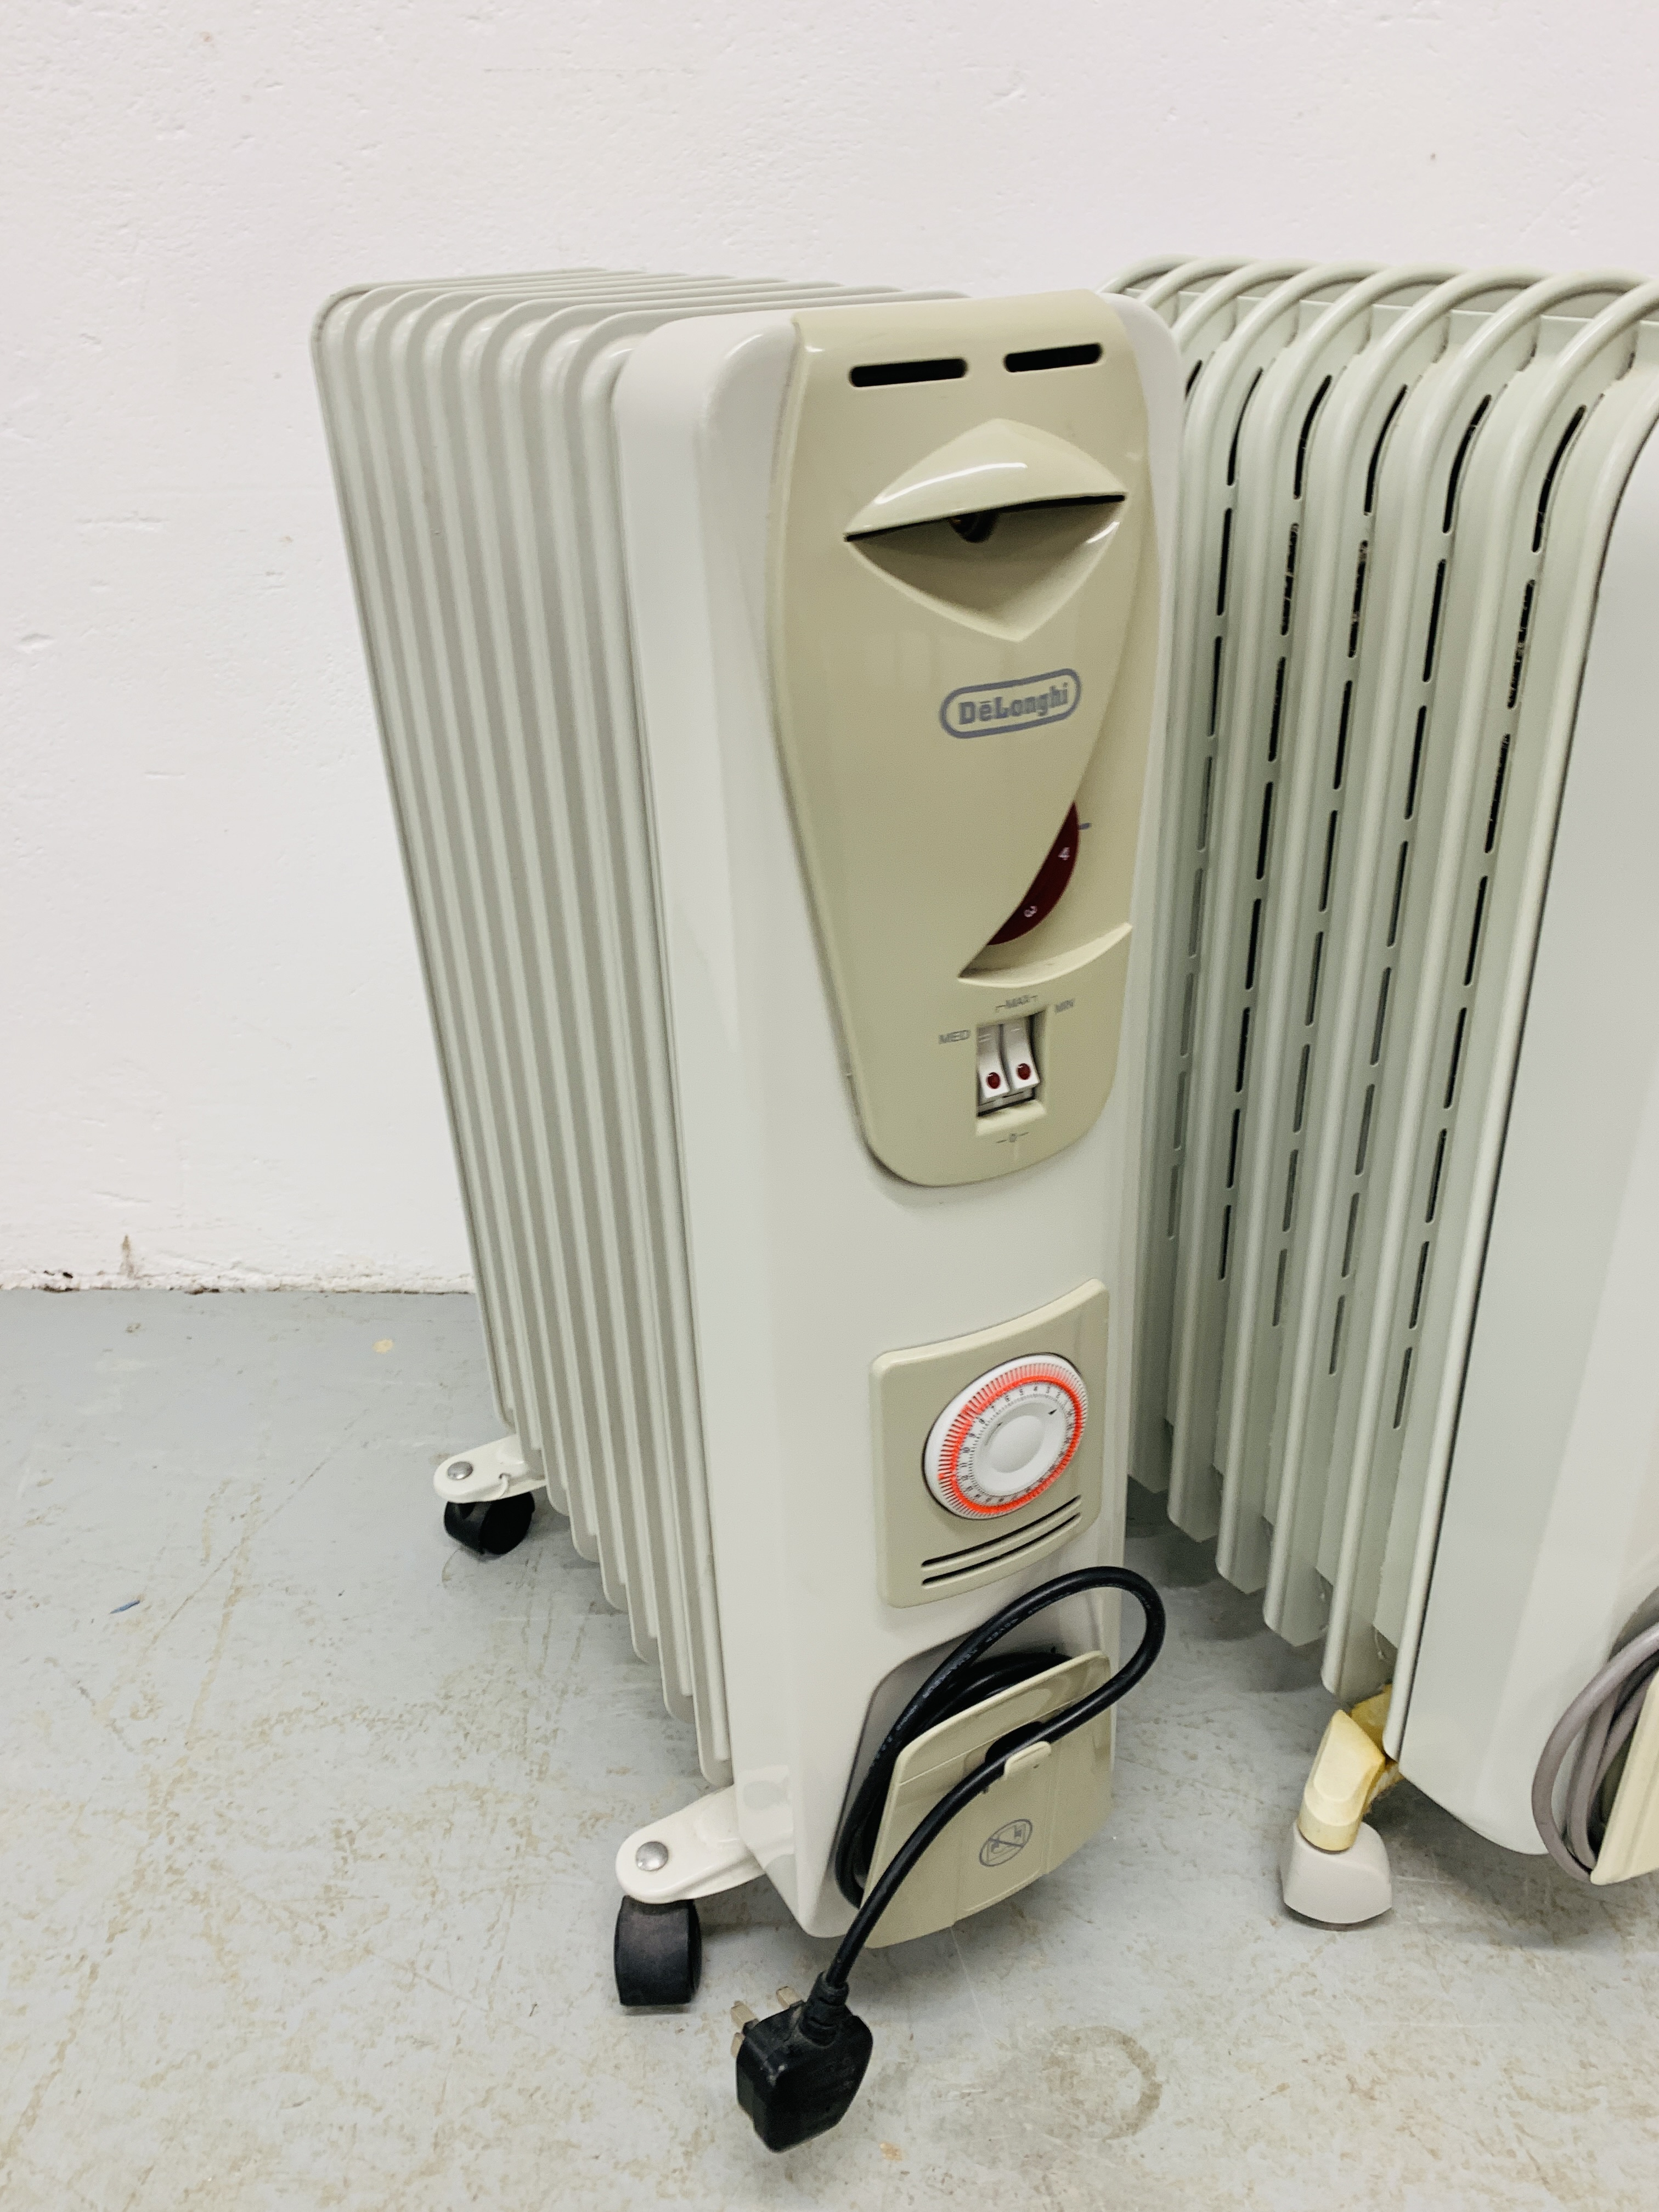 2 X DELONGHI ELECTRIC OIL FILLED RADIATORS (ONE WITH TIMER) - SOLD AS SEEN. - Image 2 of 4